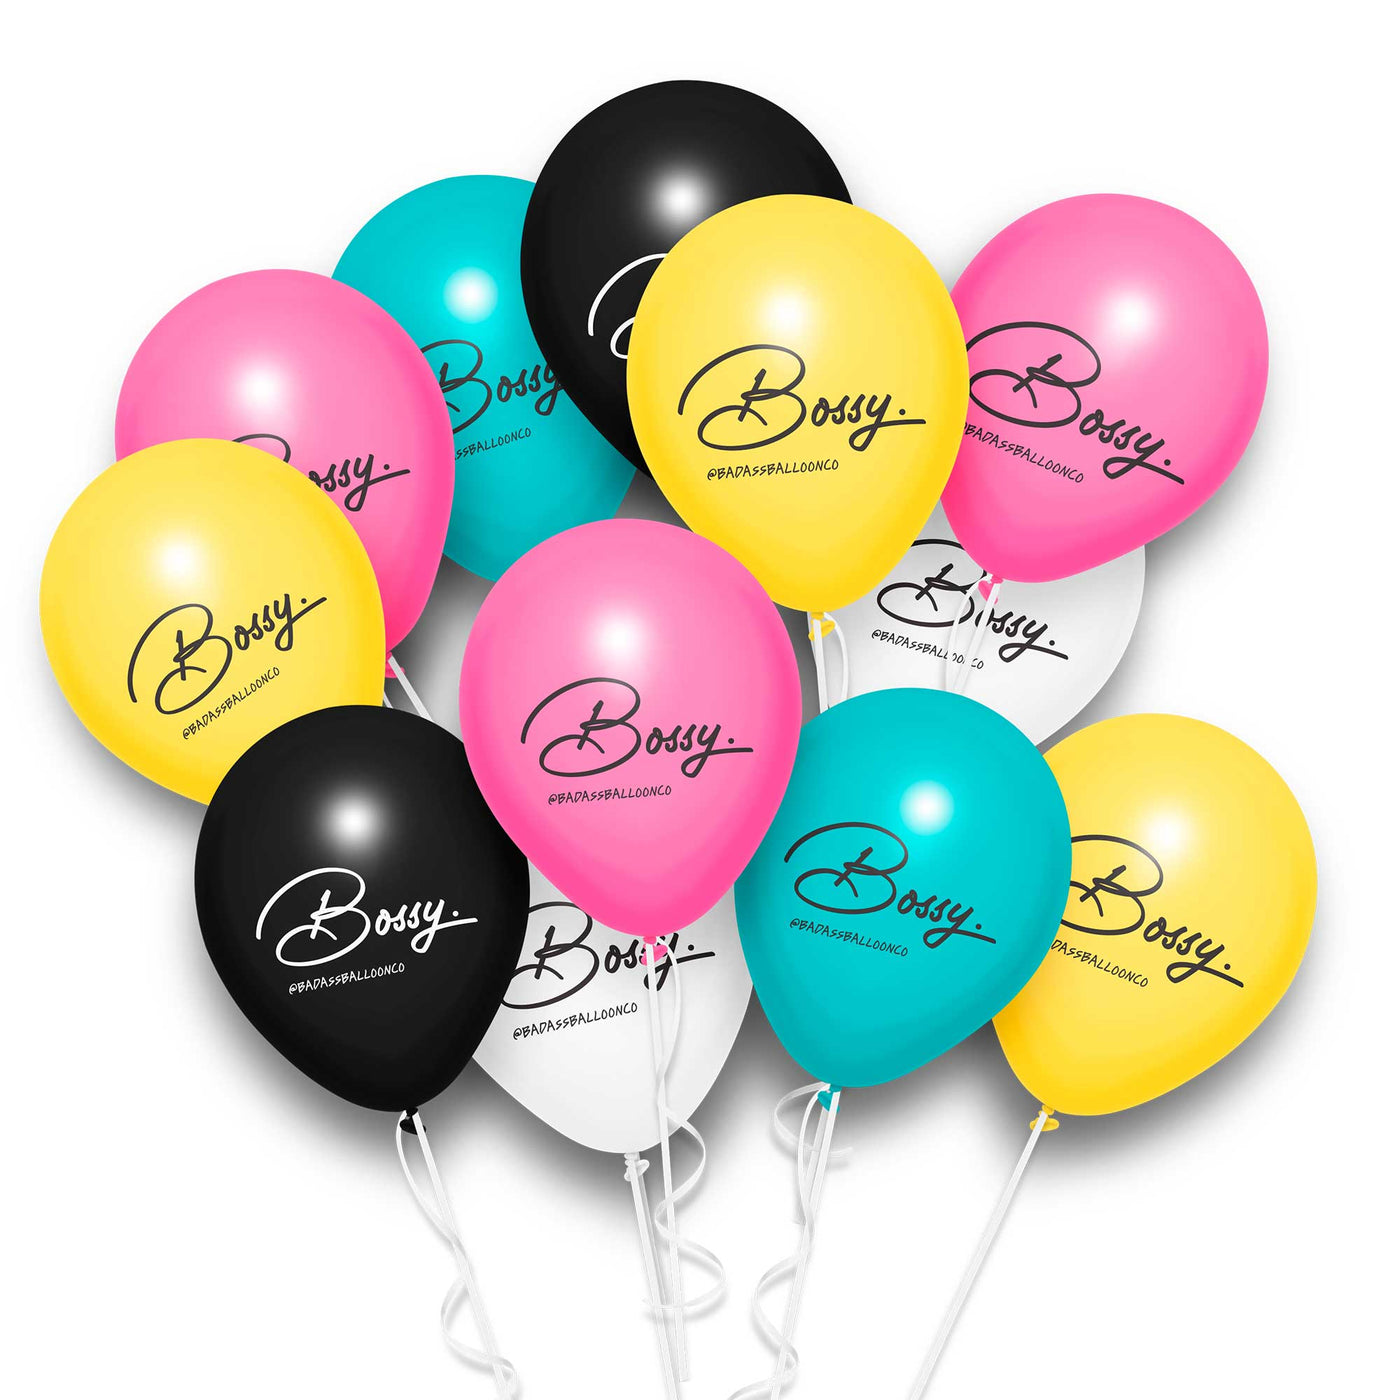 Bossy Congratuations on the Promotion Party Balloons